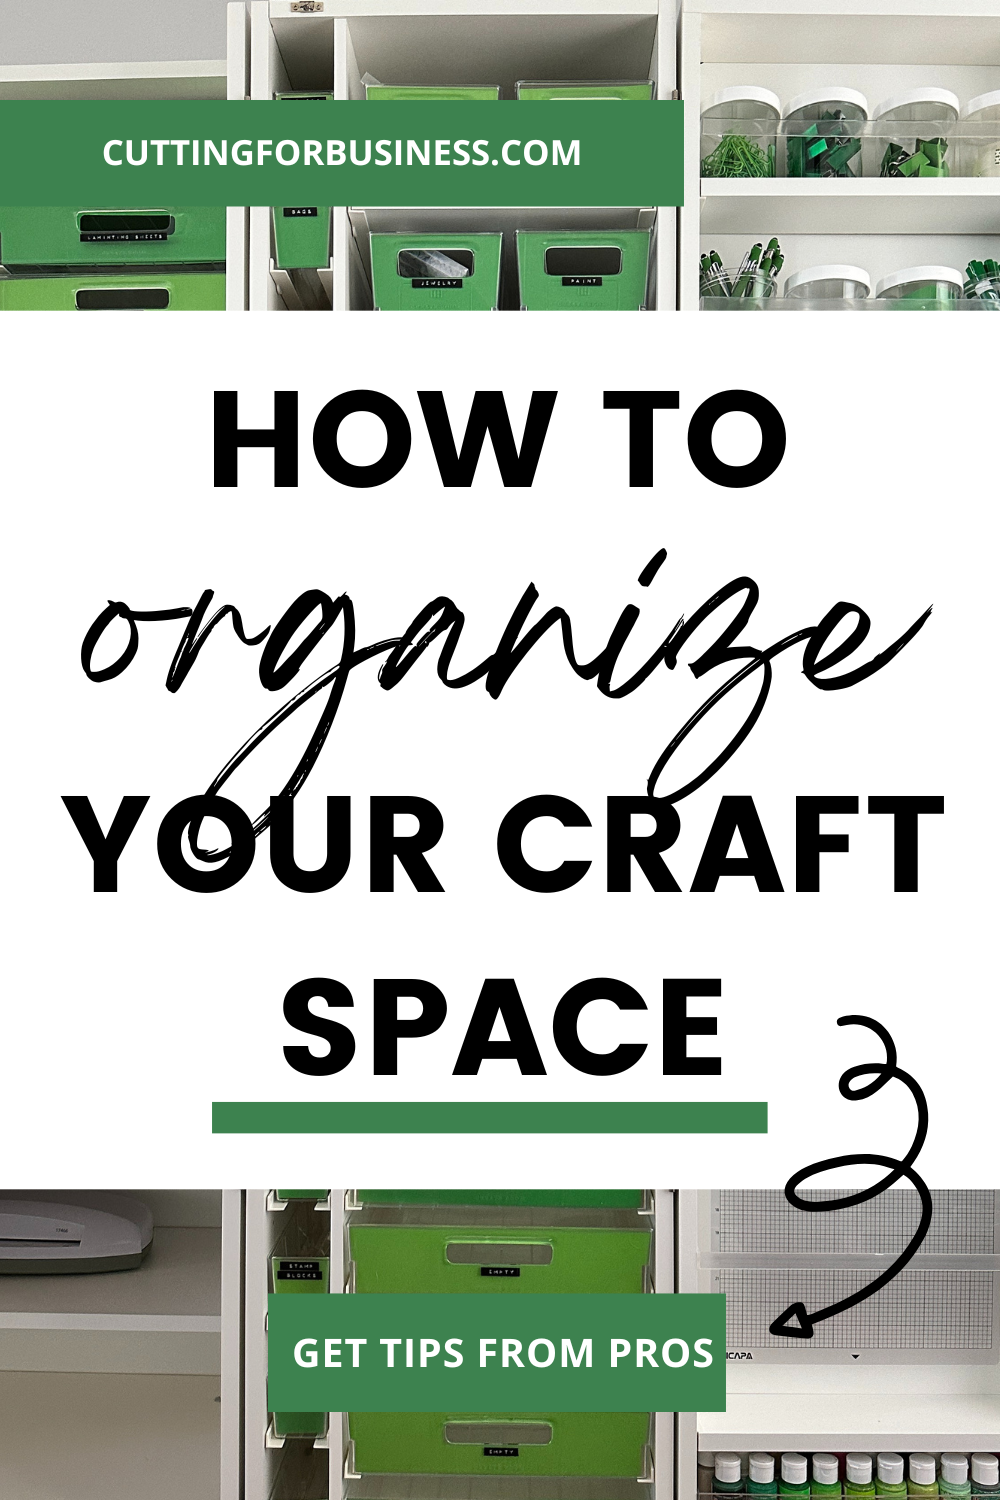 How to Organize Your Craft Room: Tips from Pros - cuttingforbusiness.com